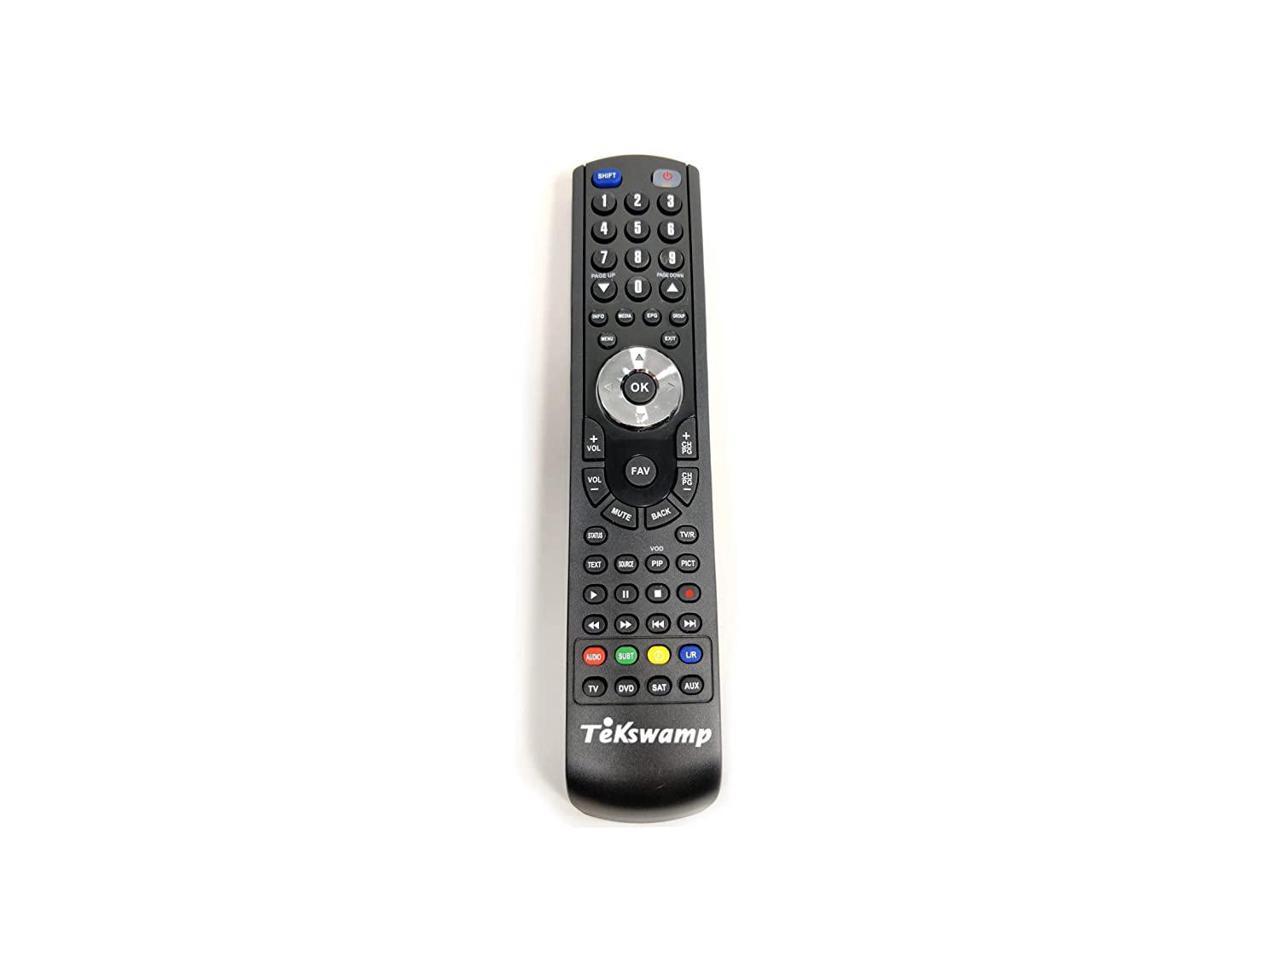 for Dukane 8934A TeKswamp Video Projector Remote Control White 